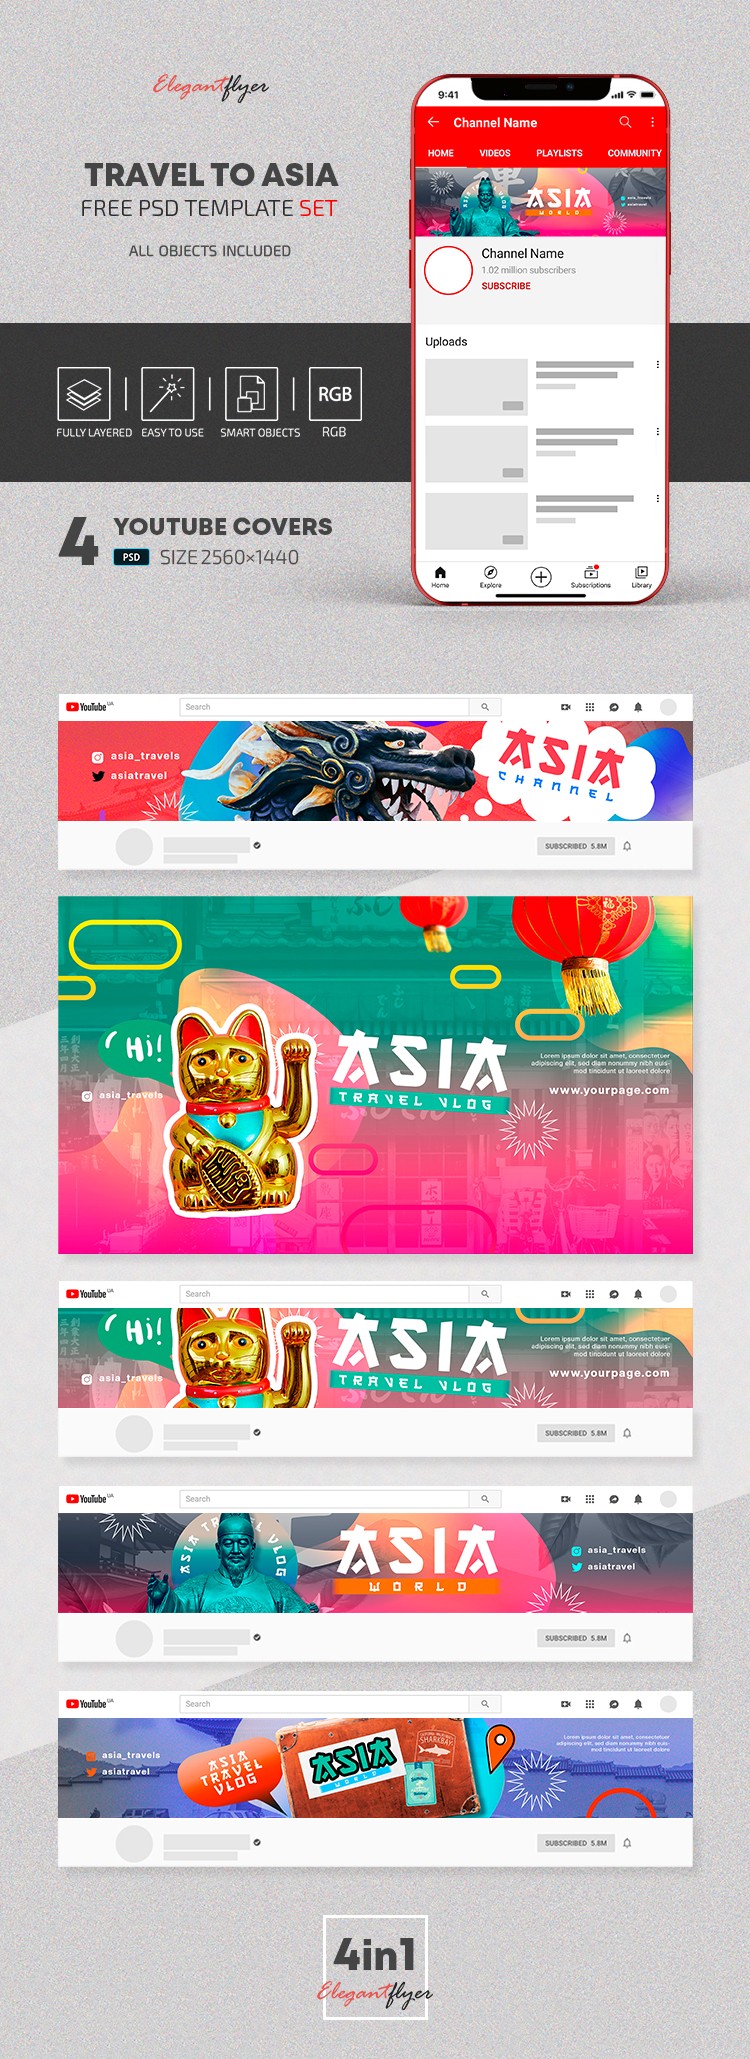 Travel to Asia - Free Youtube Channel Banner PSD Template Set by ElegantFlyer